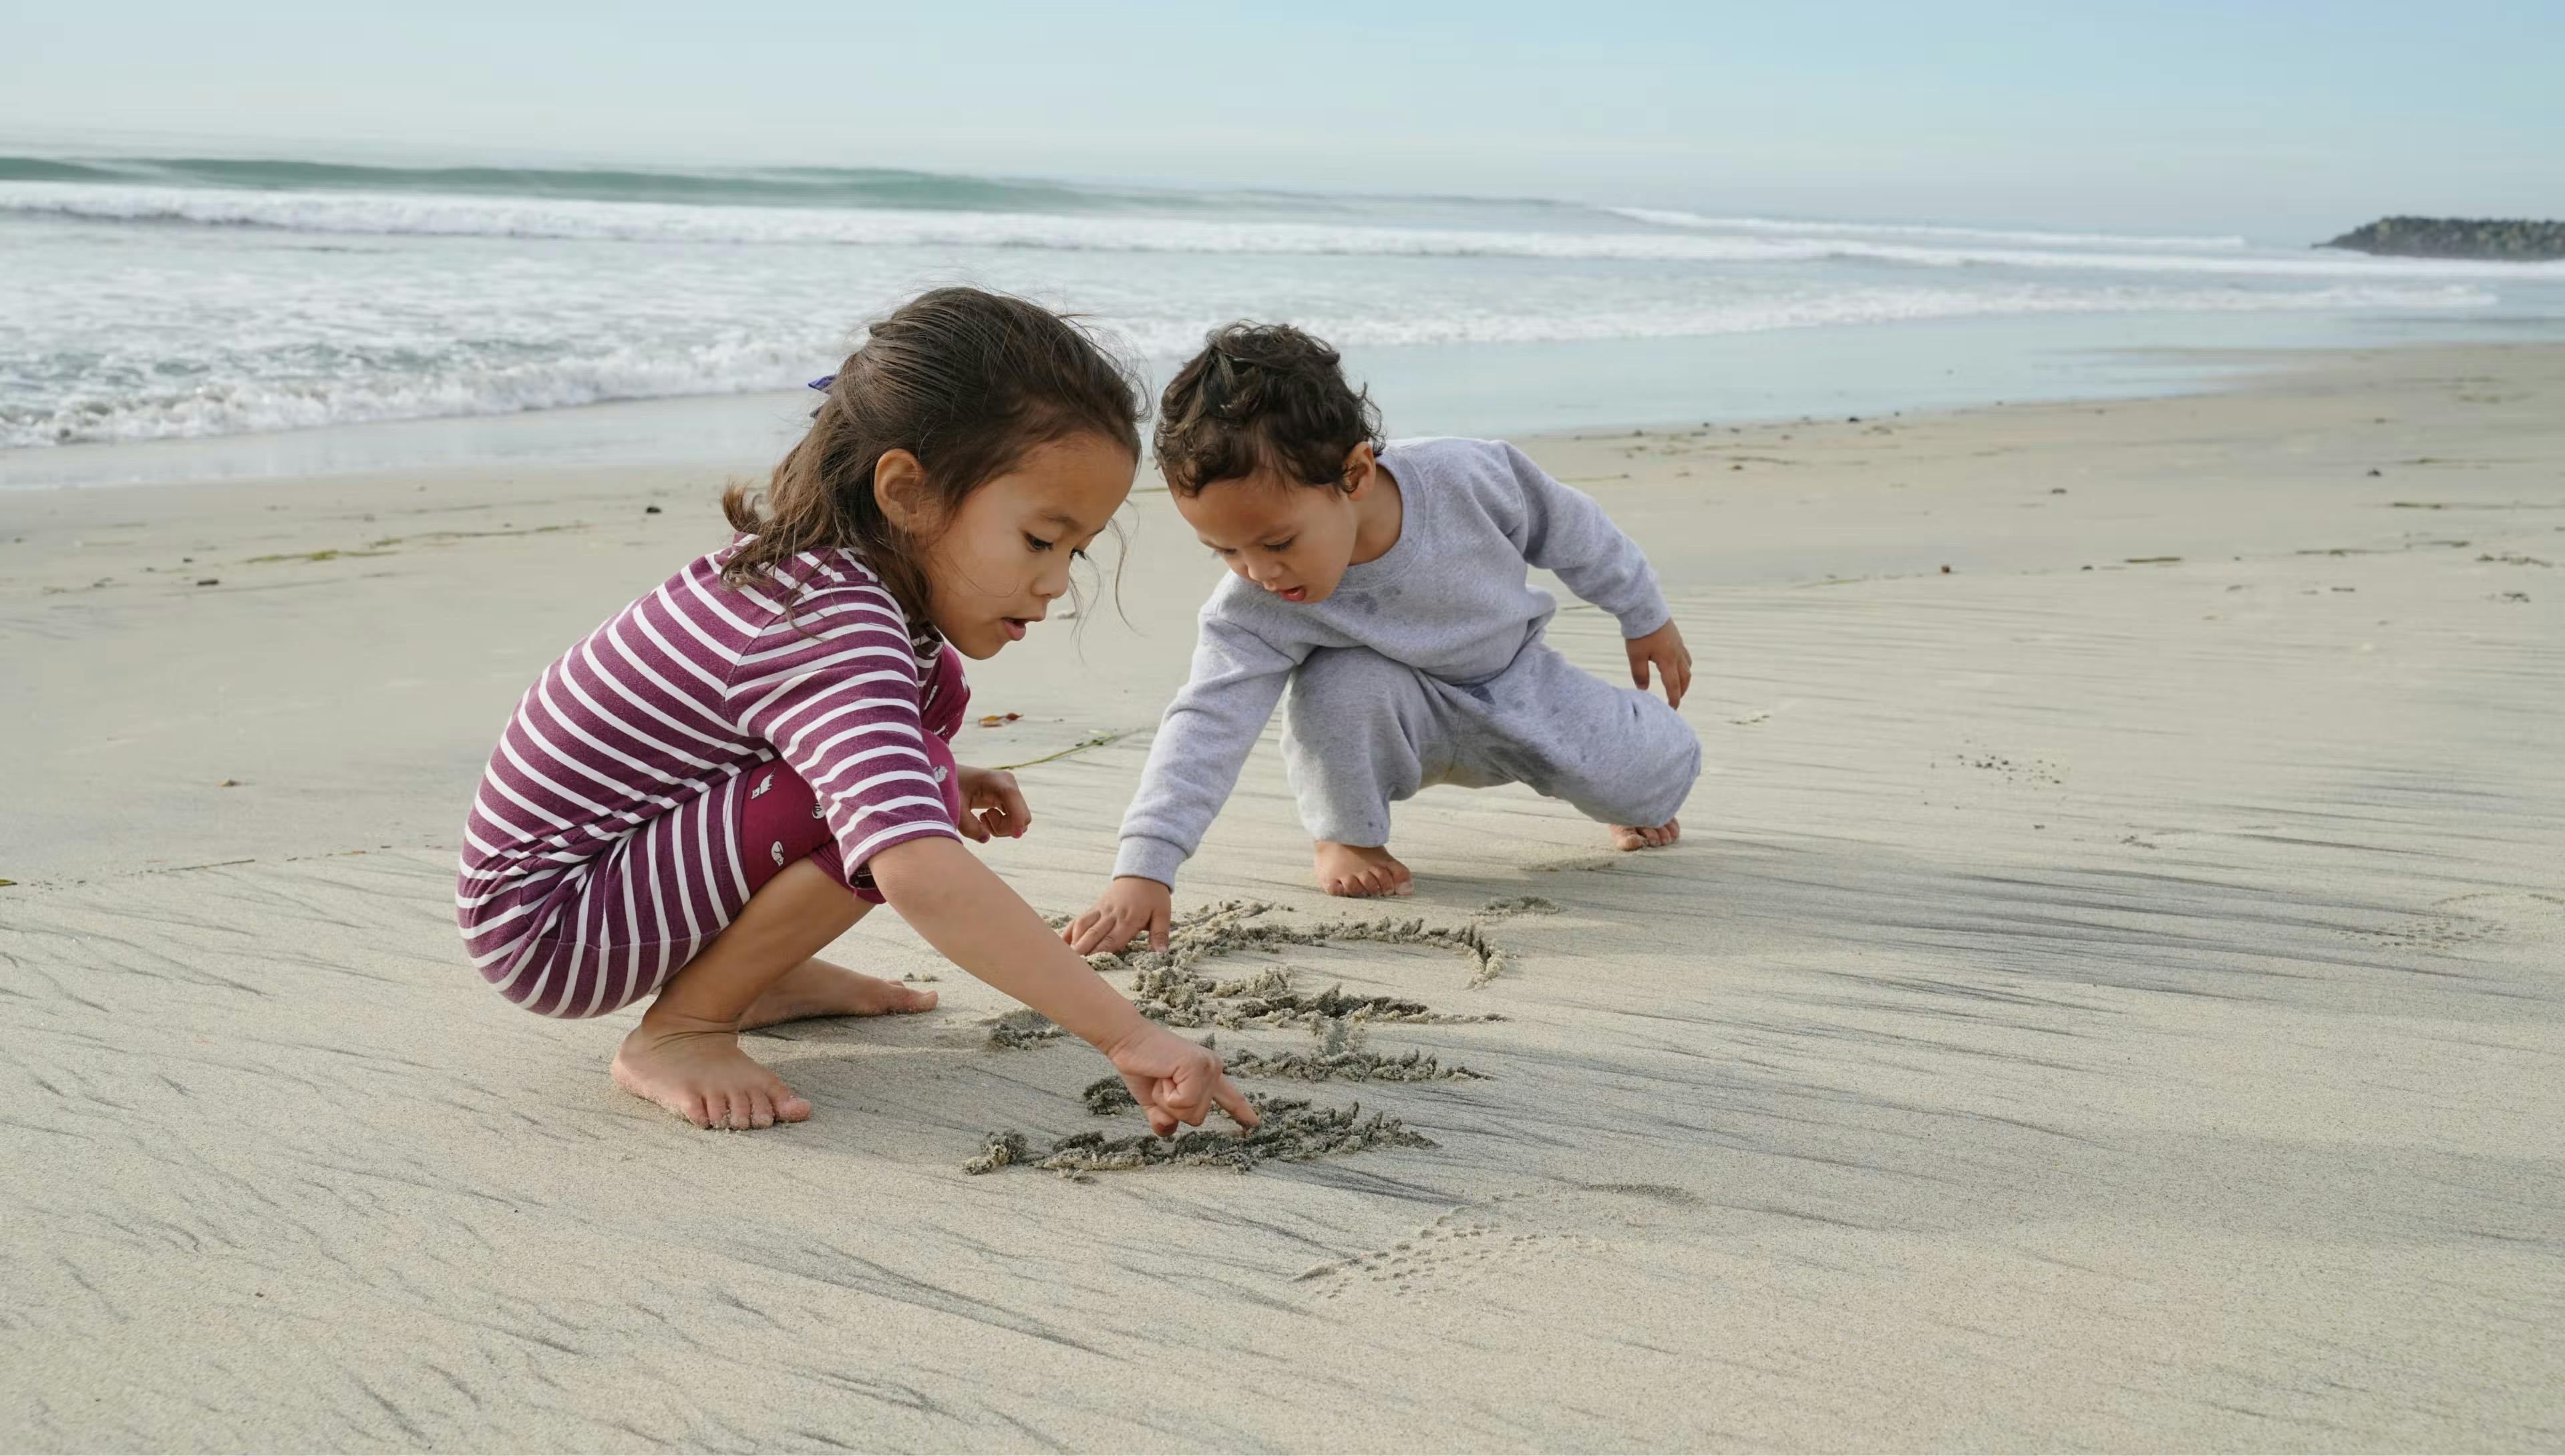 Two young children writing something in the sand on a beach